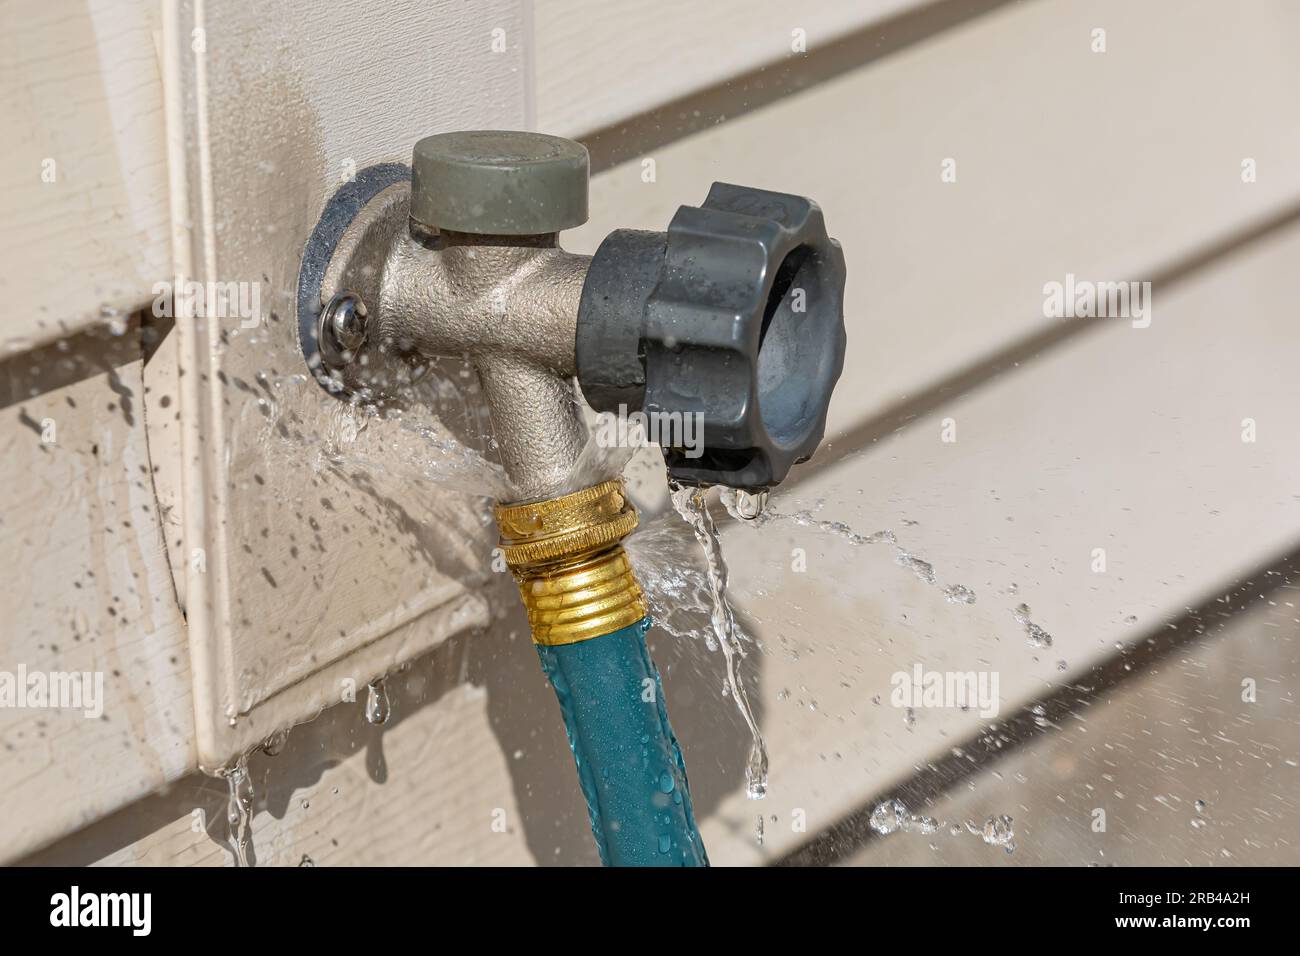 Water leaking from garden hose on outdoor spigot. Water waste, conservation and home repair concept. Stock Photo